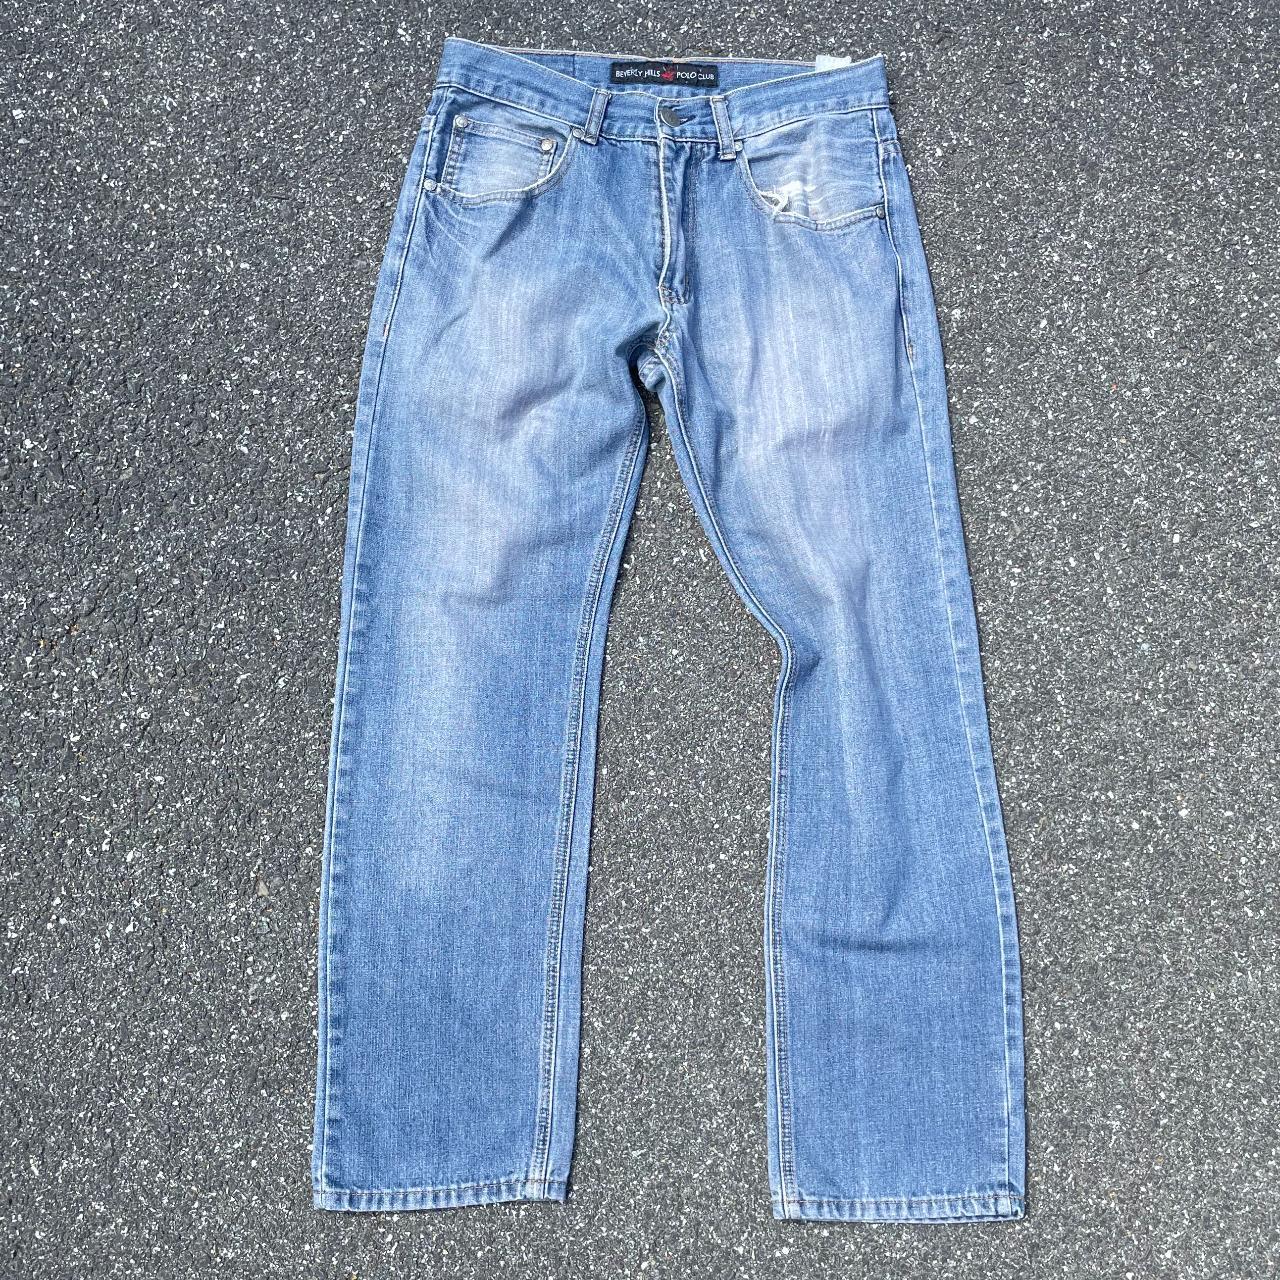 Beverly Hills Polo Club Men's Blue Jeans